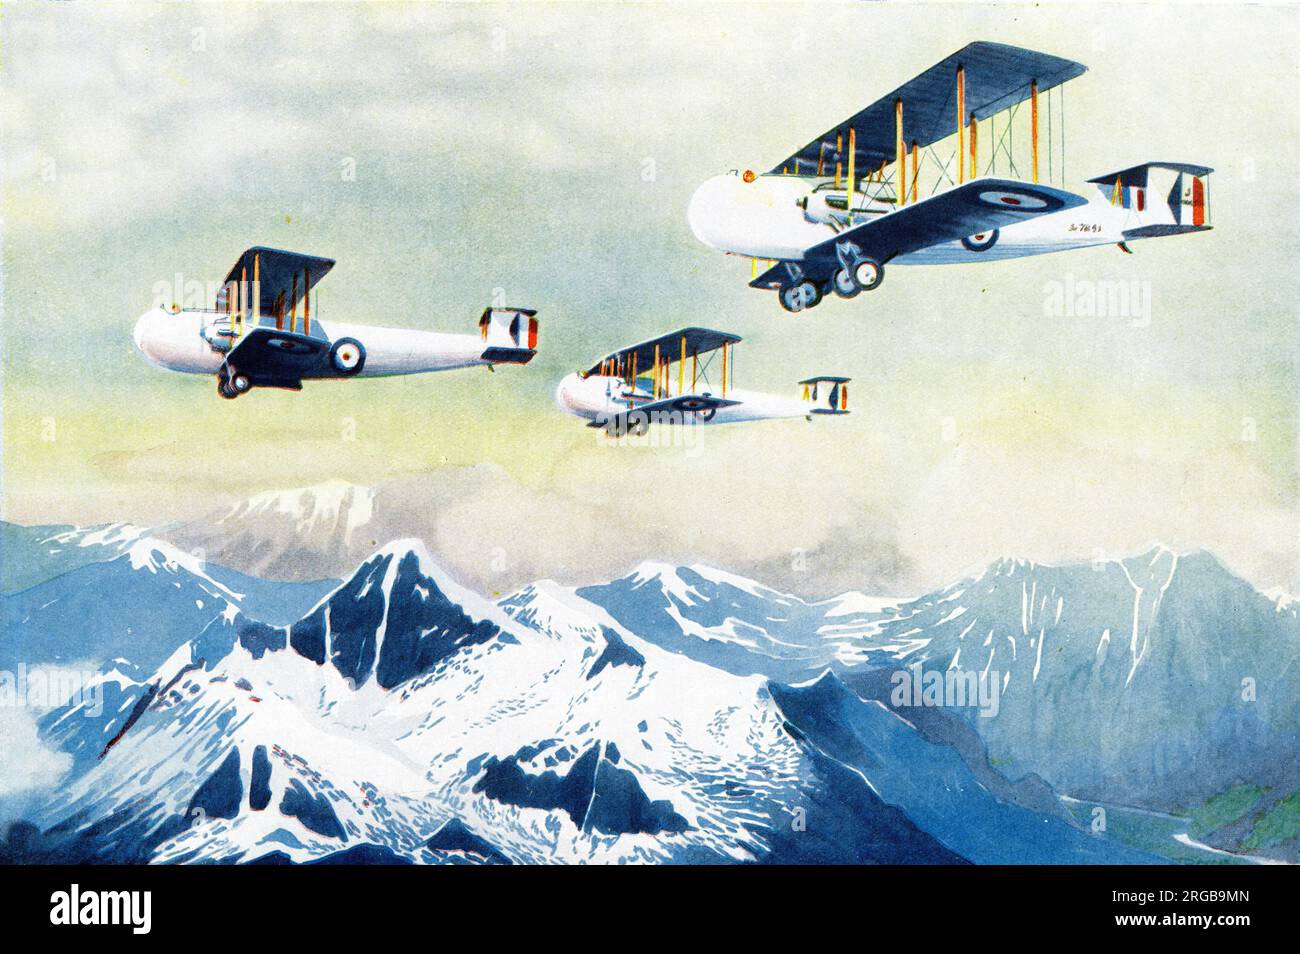 The Royal Air Force to the Rescue in Afghanistan. Illustration depicting aircraft of the RAF flying over mountainous terrain on a mission to rescue six hundred people of varying nationalities during the 1928-29 revolution in Afghanistan. Eighty-three journeys were made in fifty days by Vickers-Napier 'Victoria' aircraft, each carrying two pilots and 23 evacuees. No lives were lost in the operation. Stock Photo